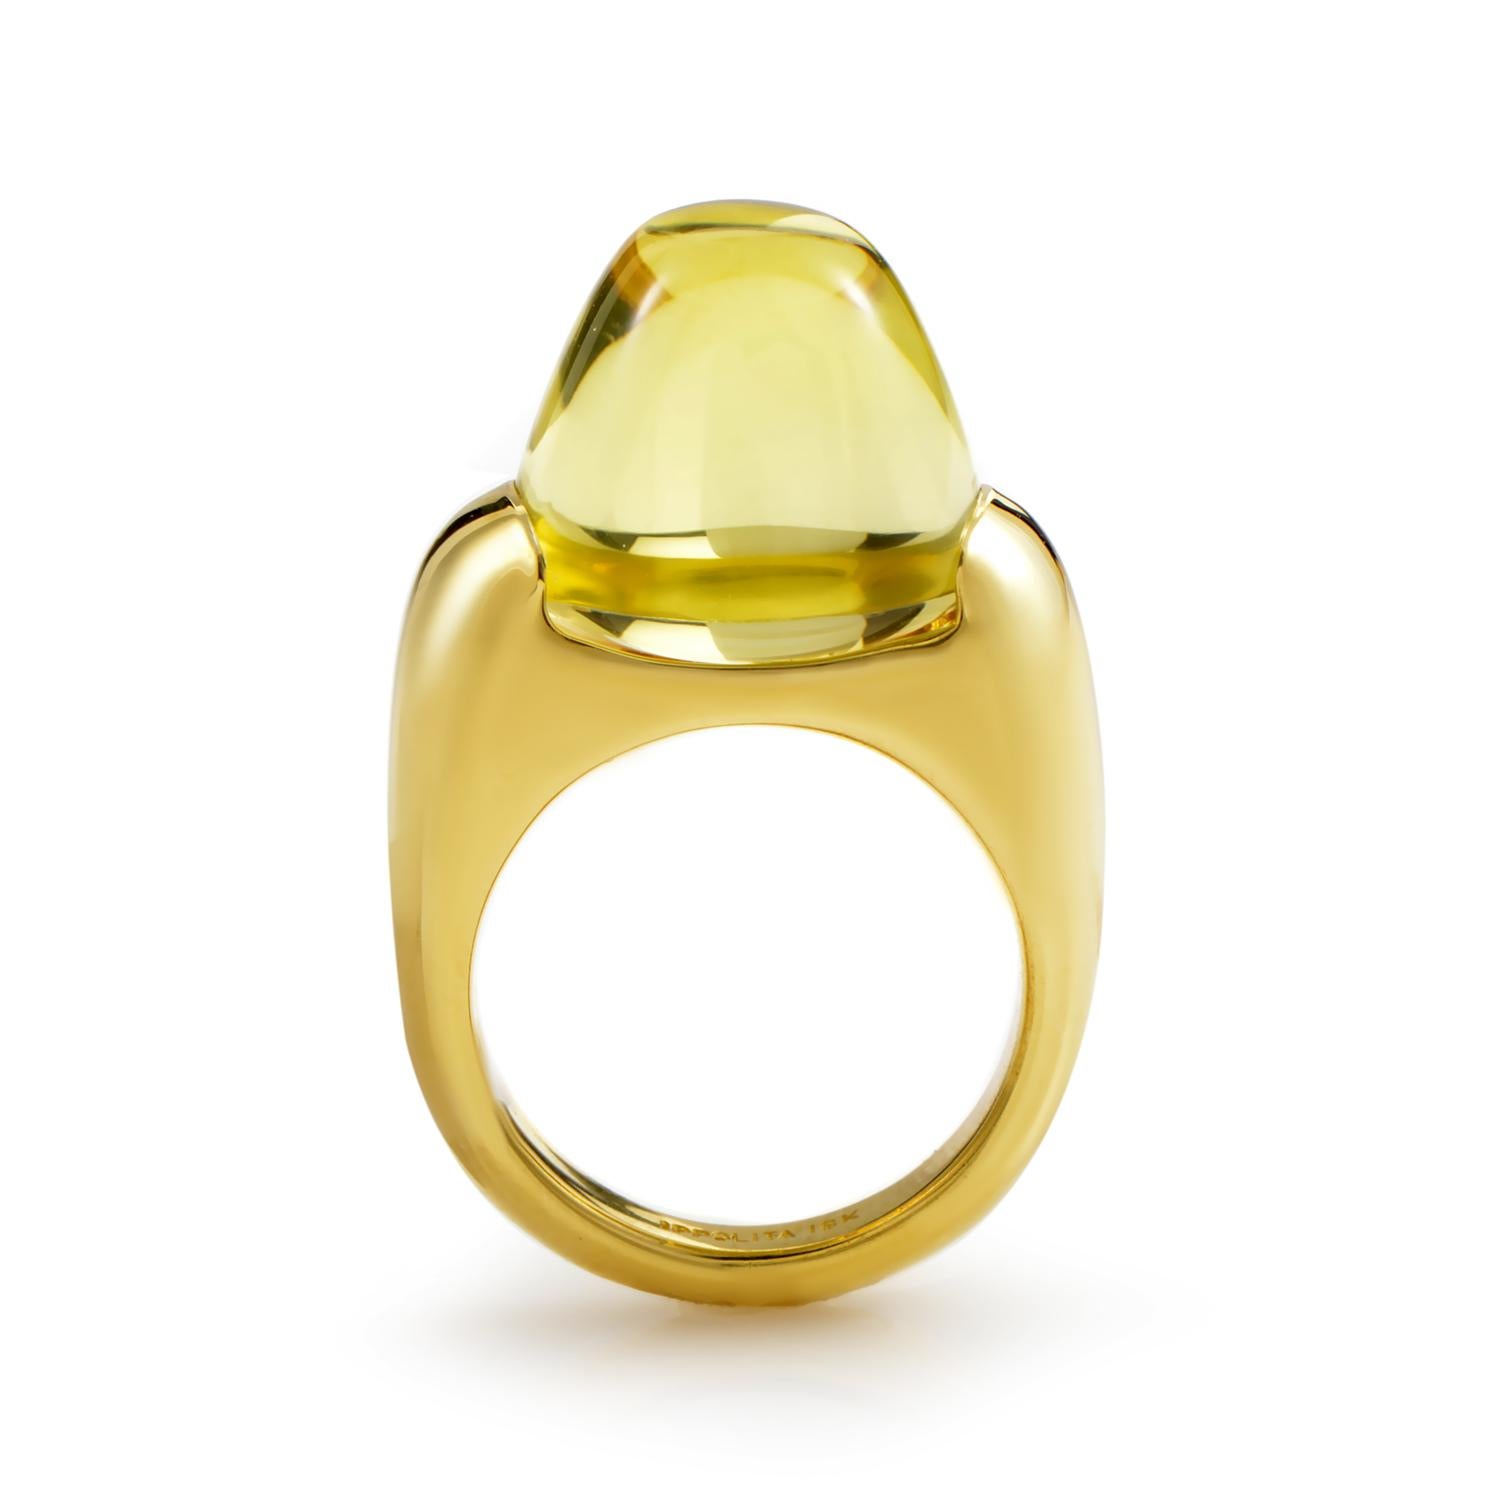 The warm golden glow exuded by this dazzling ring from Ippolita is absolutely spellbinding! The ring is made of 18K yellow gold and boasts a lemon quartz cabochon main stone.